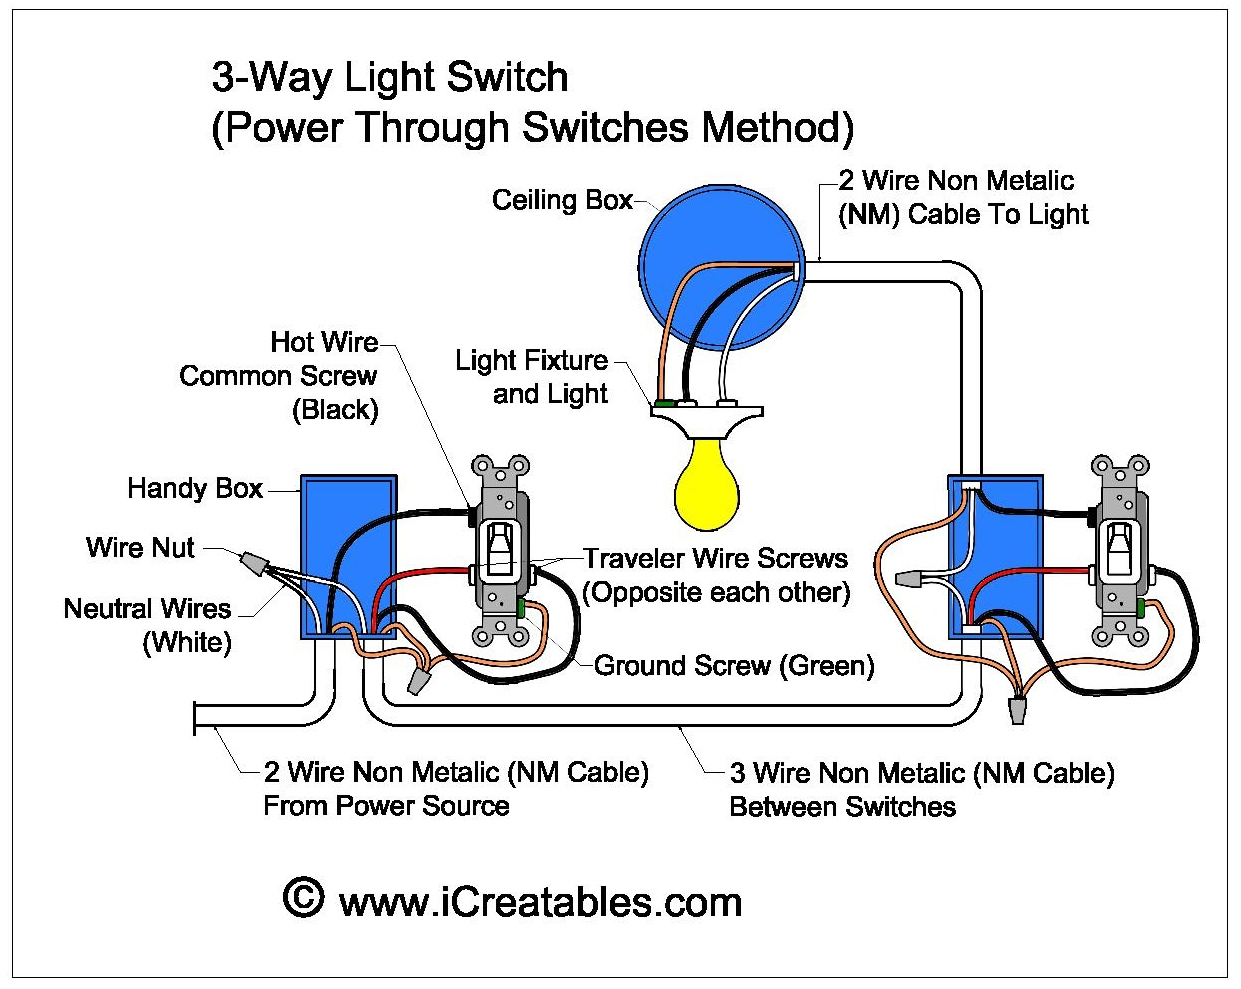 Electric Stove Stove Switch Wiring Diagrams from www.icreatables.com